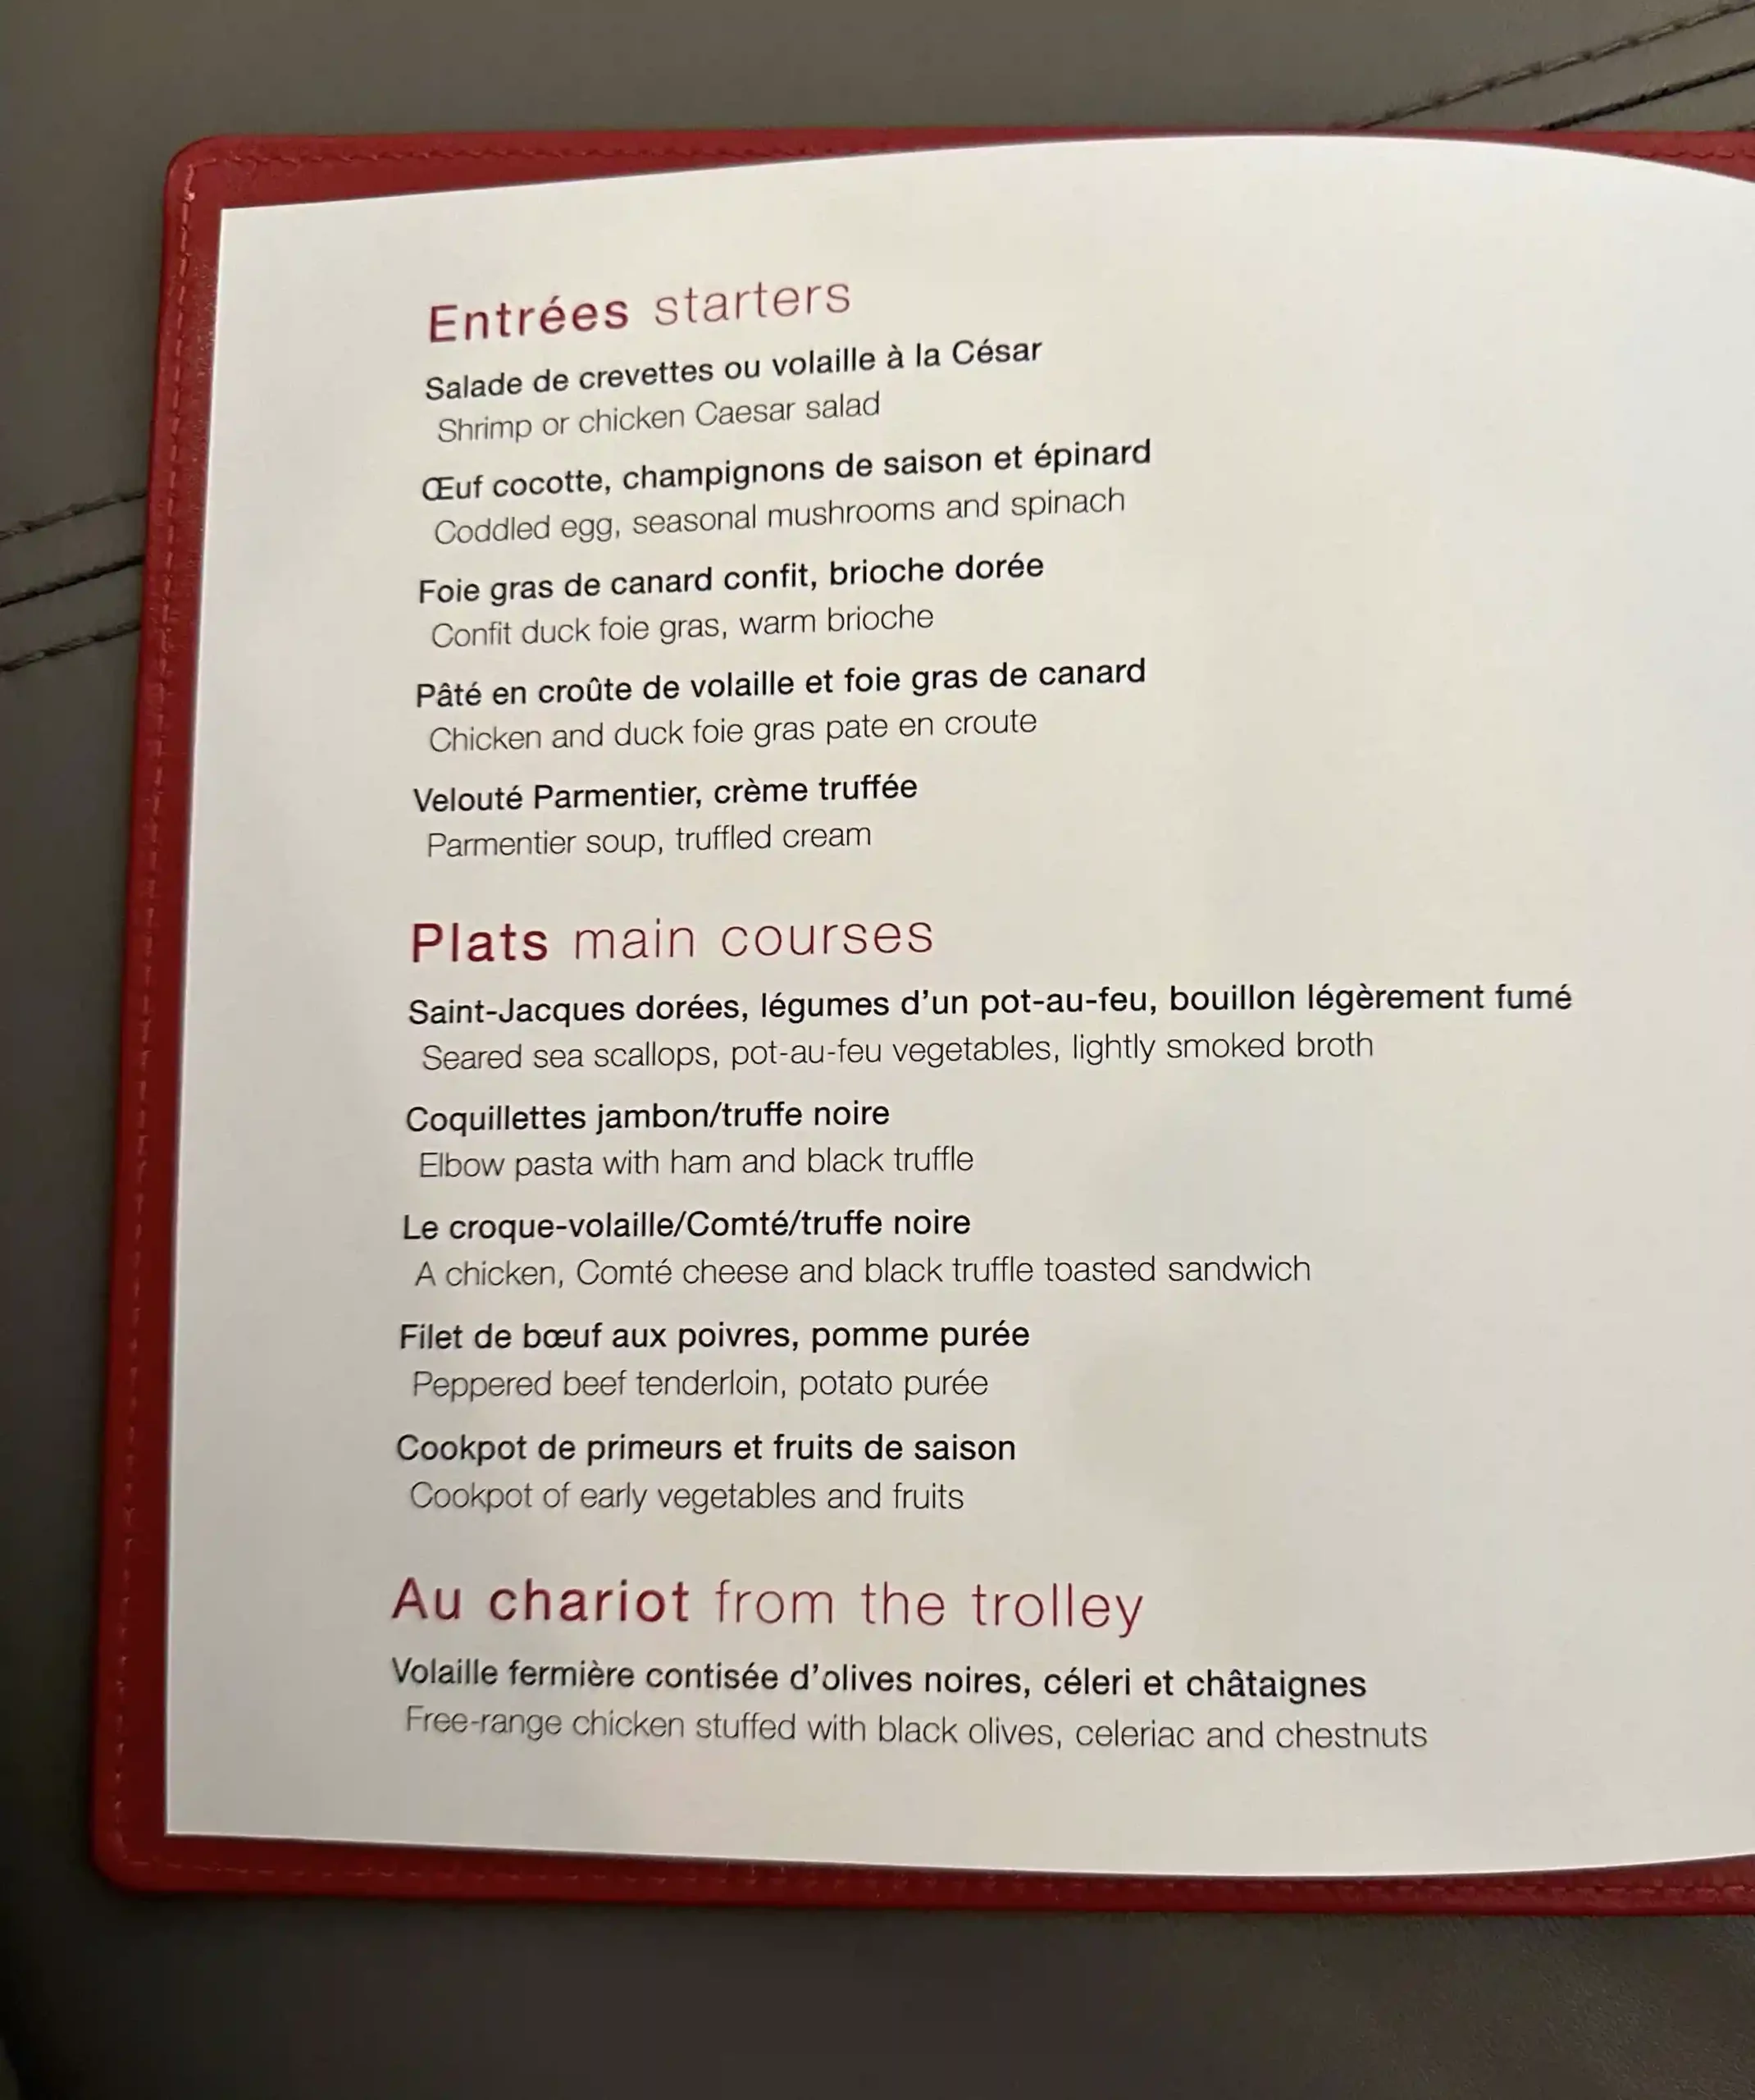 a menu with red cover